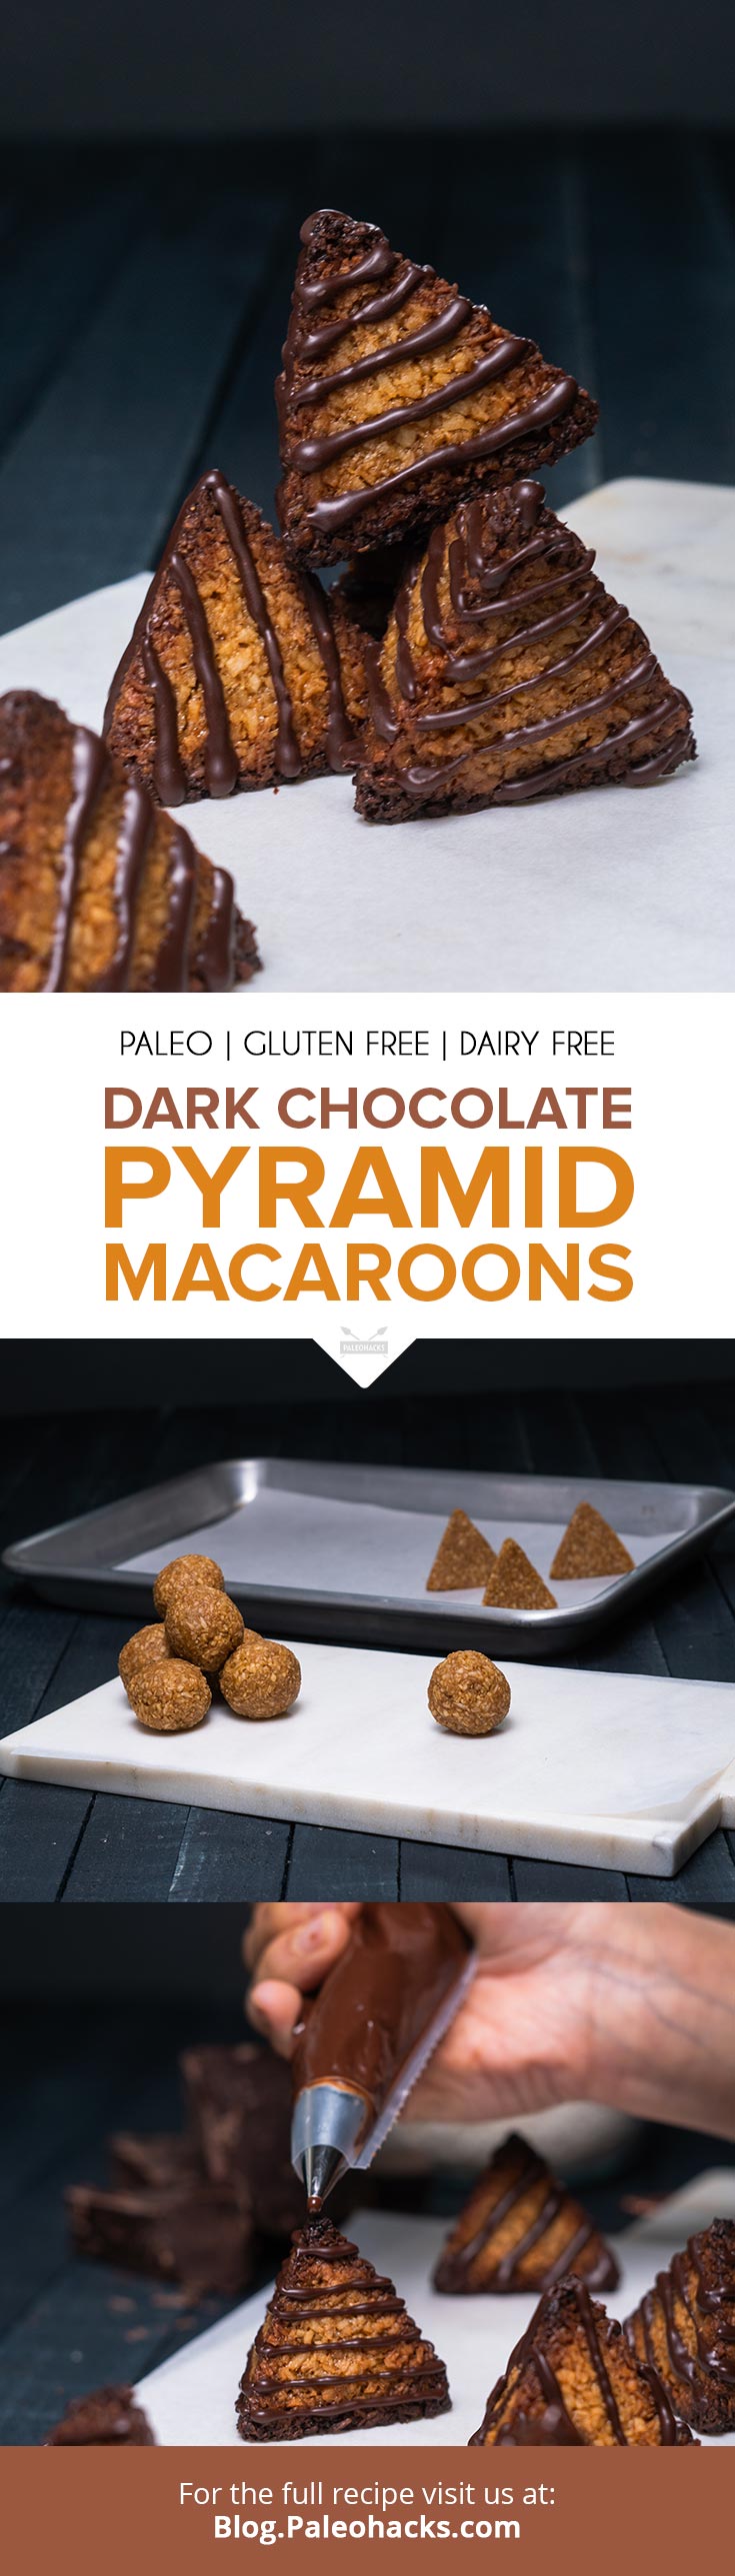 With only a handful of whole food ingredients and some dexterity, you can achieve these gorgeous pyramid macaroons - bound to impress whoever you whip them up for.